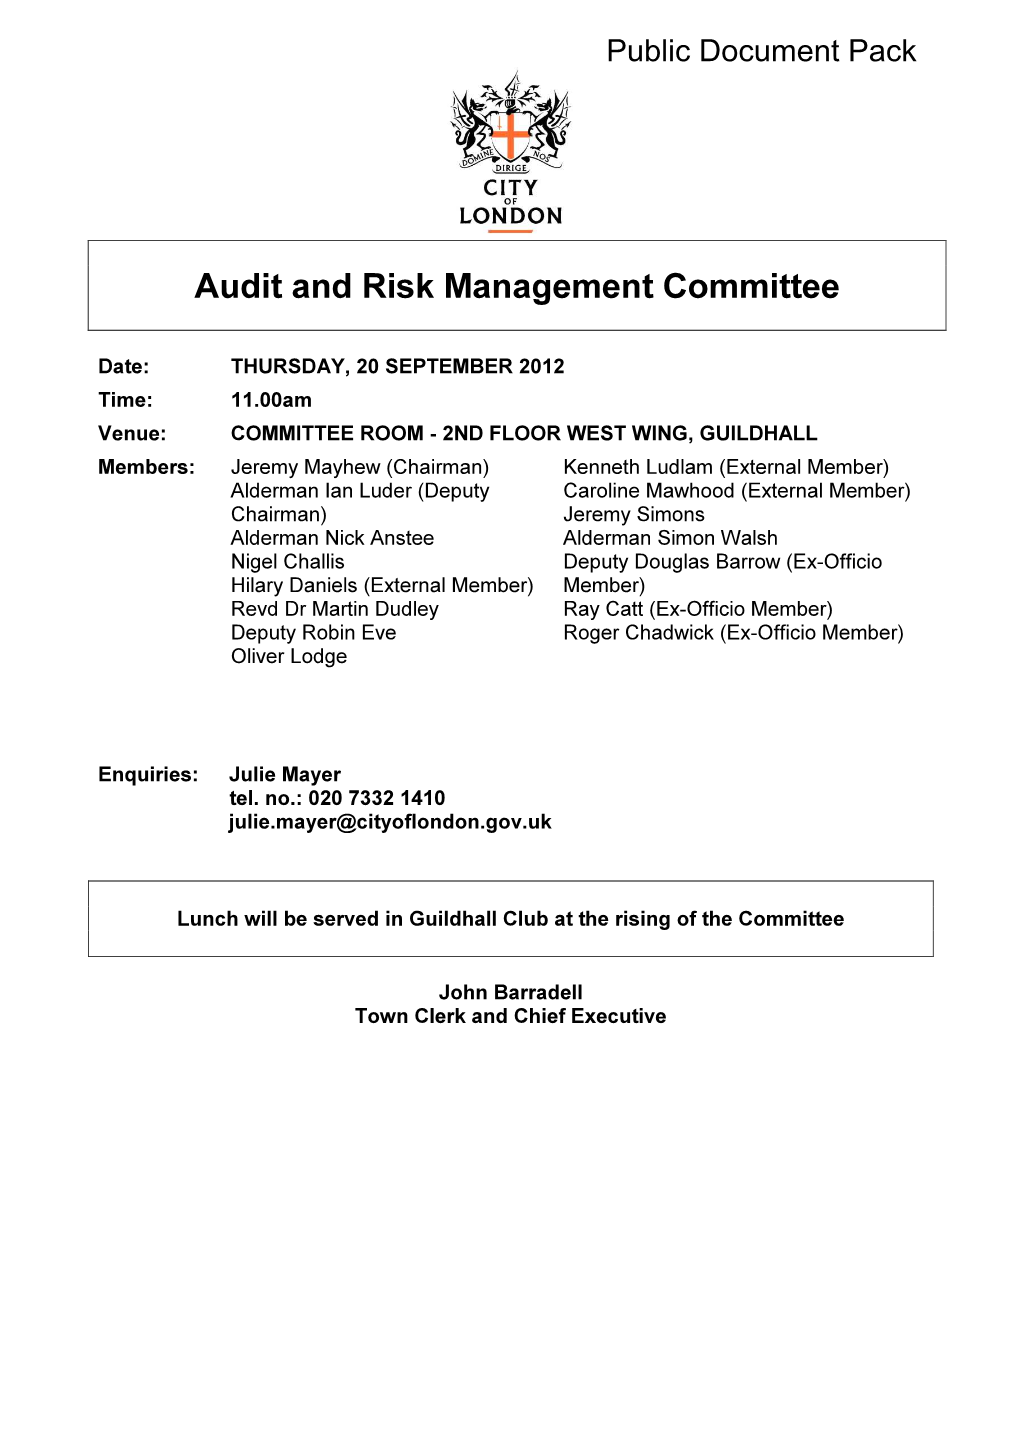 Audit and Risk Management Committee